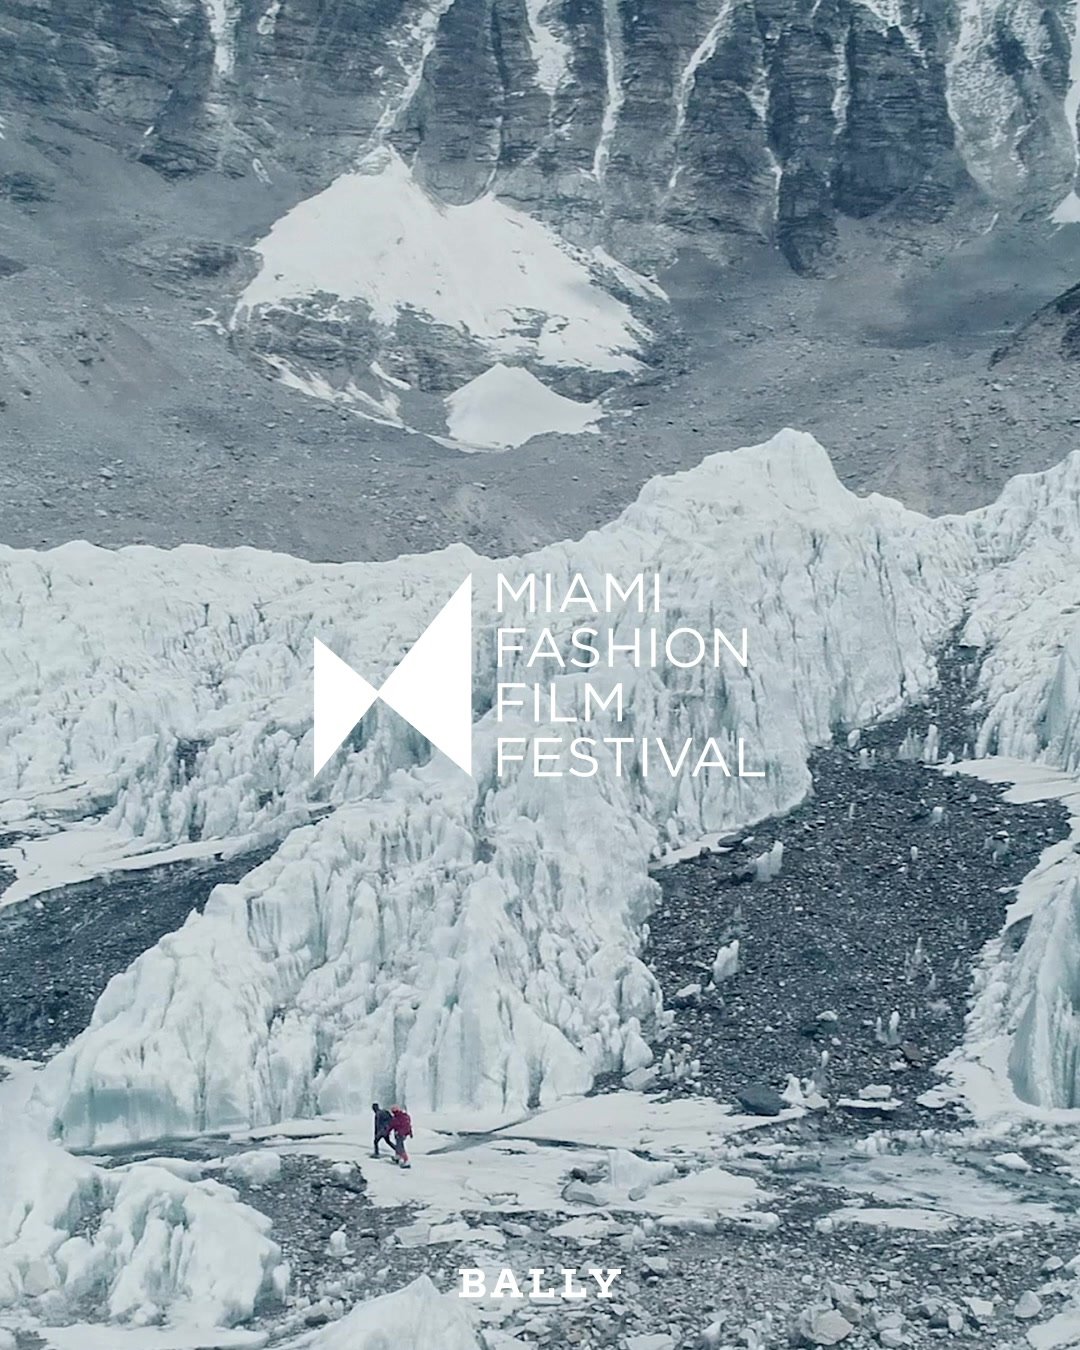 We are honored to receive the award for Best Cinematography by Miami Fashion Film Festival for our Bally Peak Outlook short film documenting our cleanup expedition to Mt. Everest. 